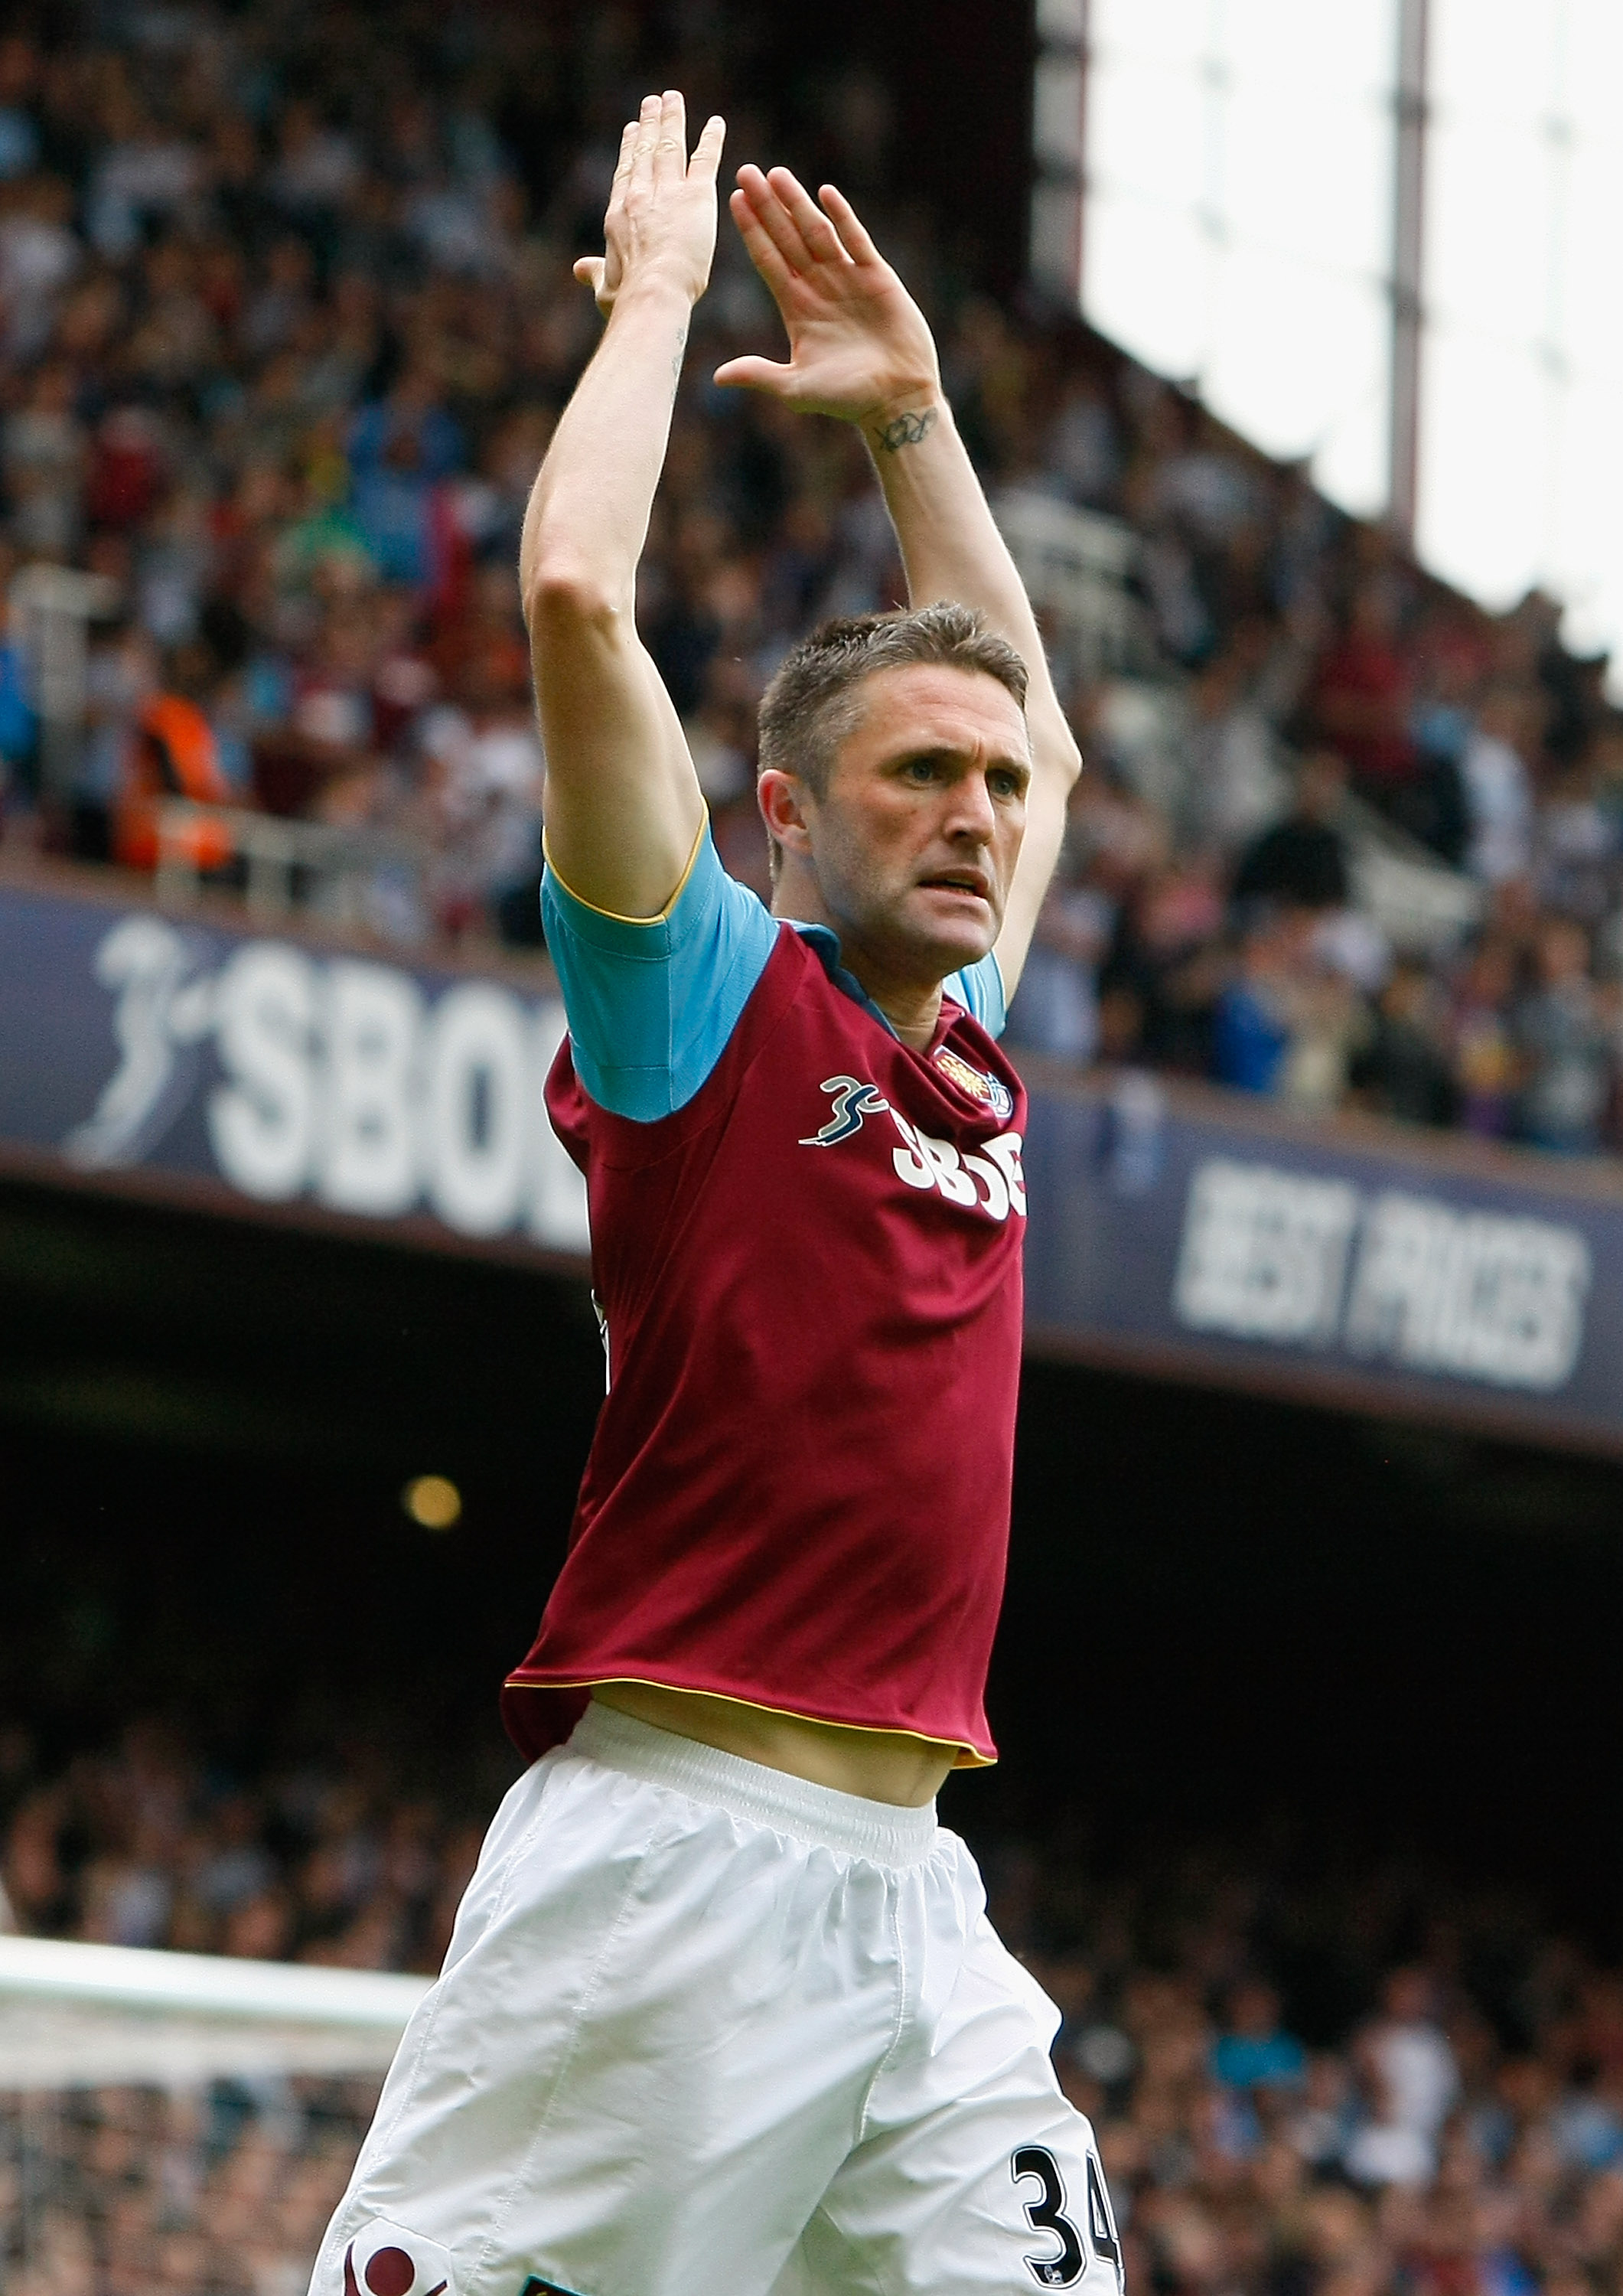 LONDON, ENGLAND - APRIL 16:  Robbie Keane of West Ham United celebrates scoring the opening goal during the Barclays Premier League match between West Ham United and Aston Villa at the Boleyn Ground on April 16, 2011 in London, England.  (Photo by Tom Dul